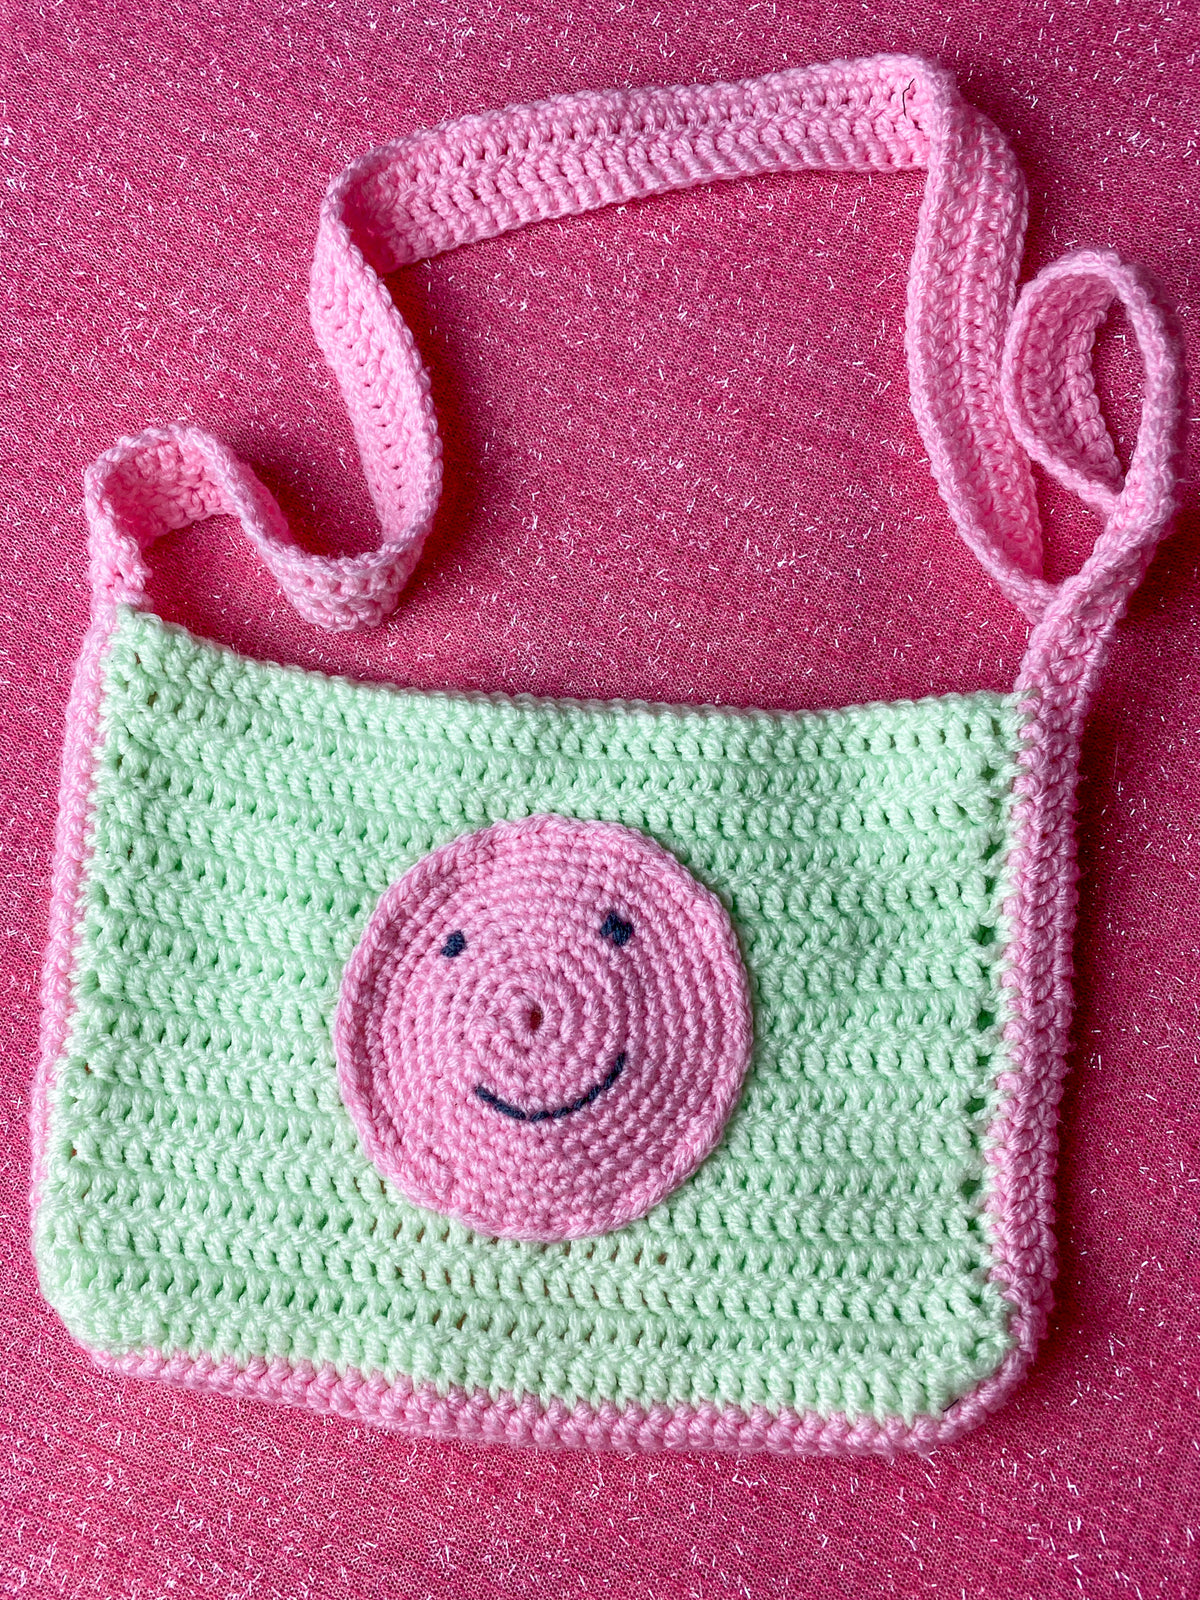 my pink and green crochet dream